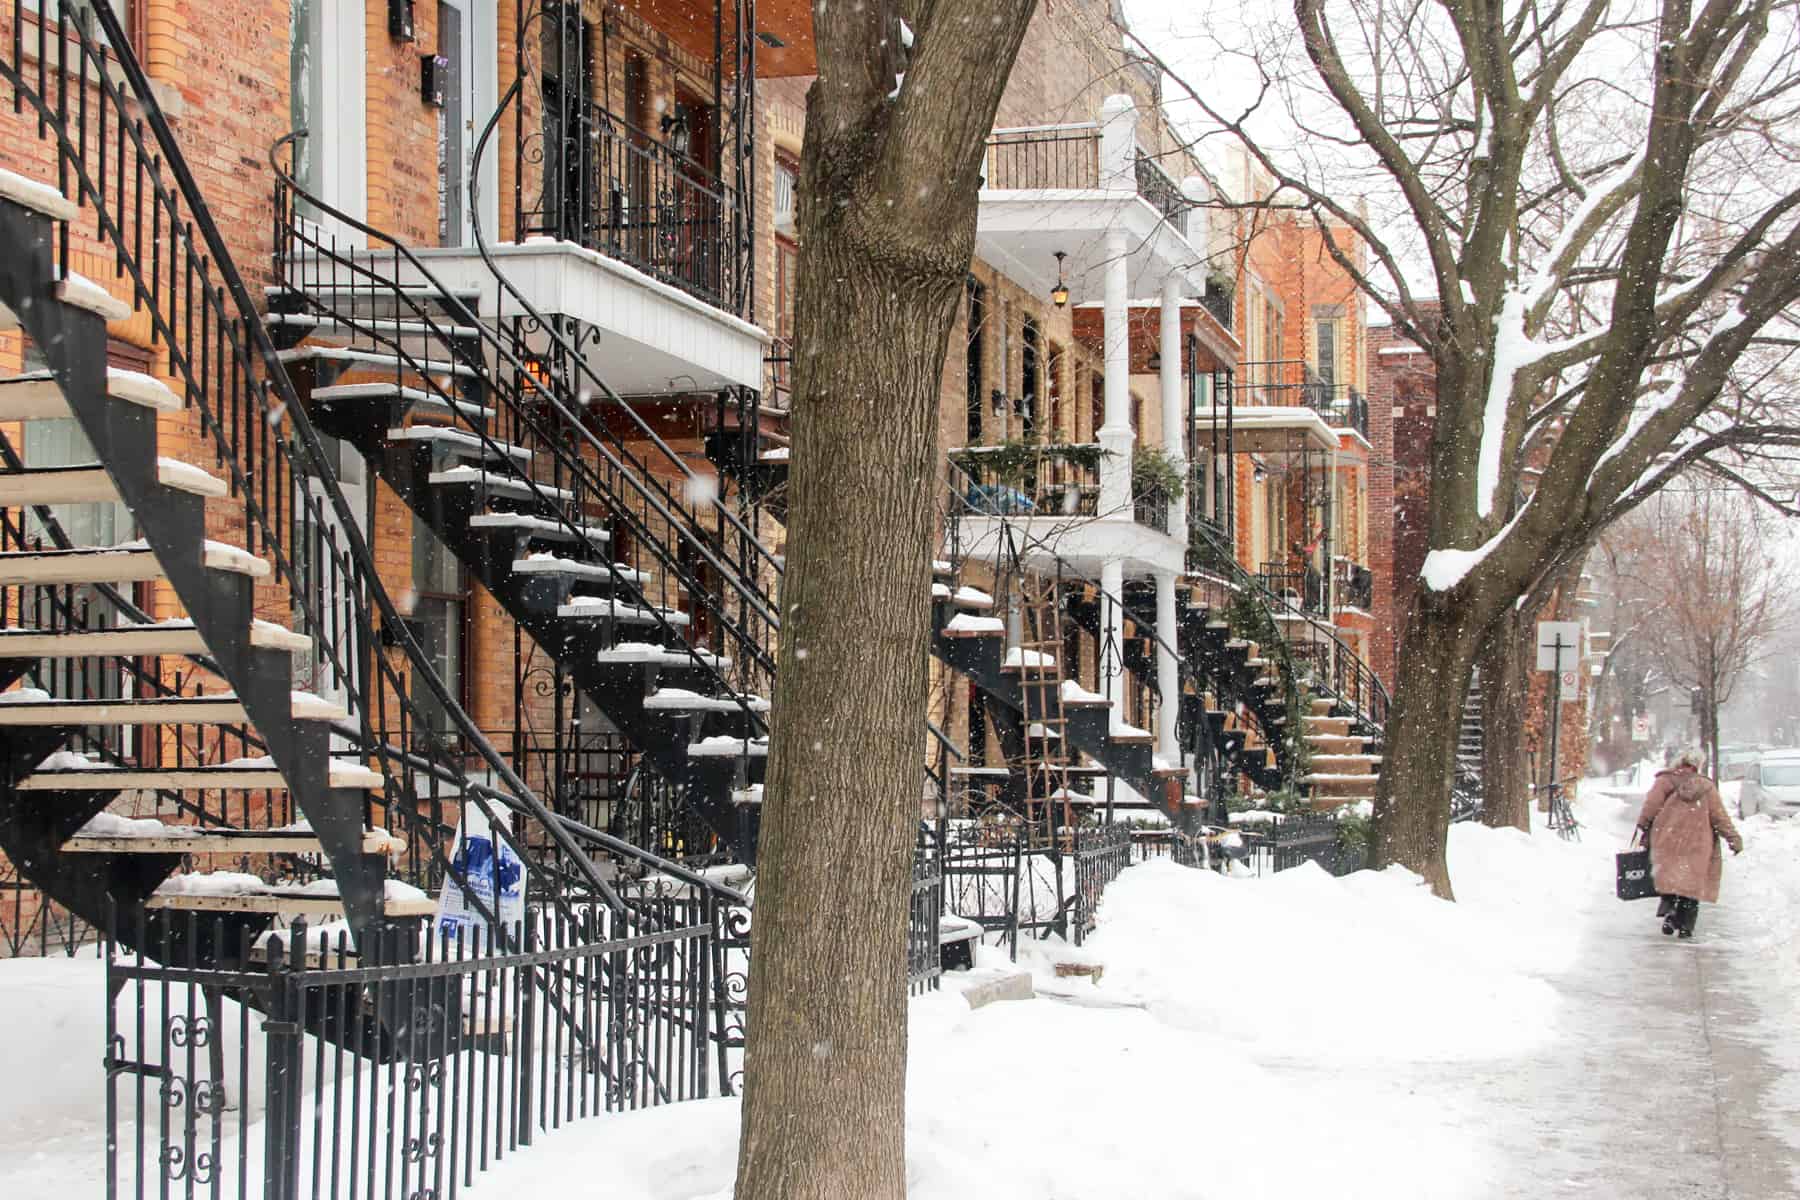  A person walks on pathway covered in snow next to a row of famed Montreal staircases that are an architectural features of houses here. 